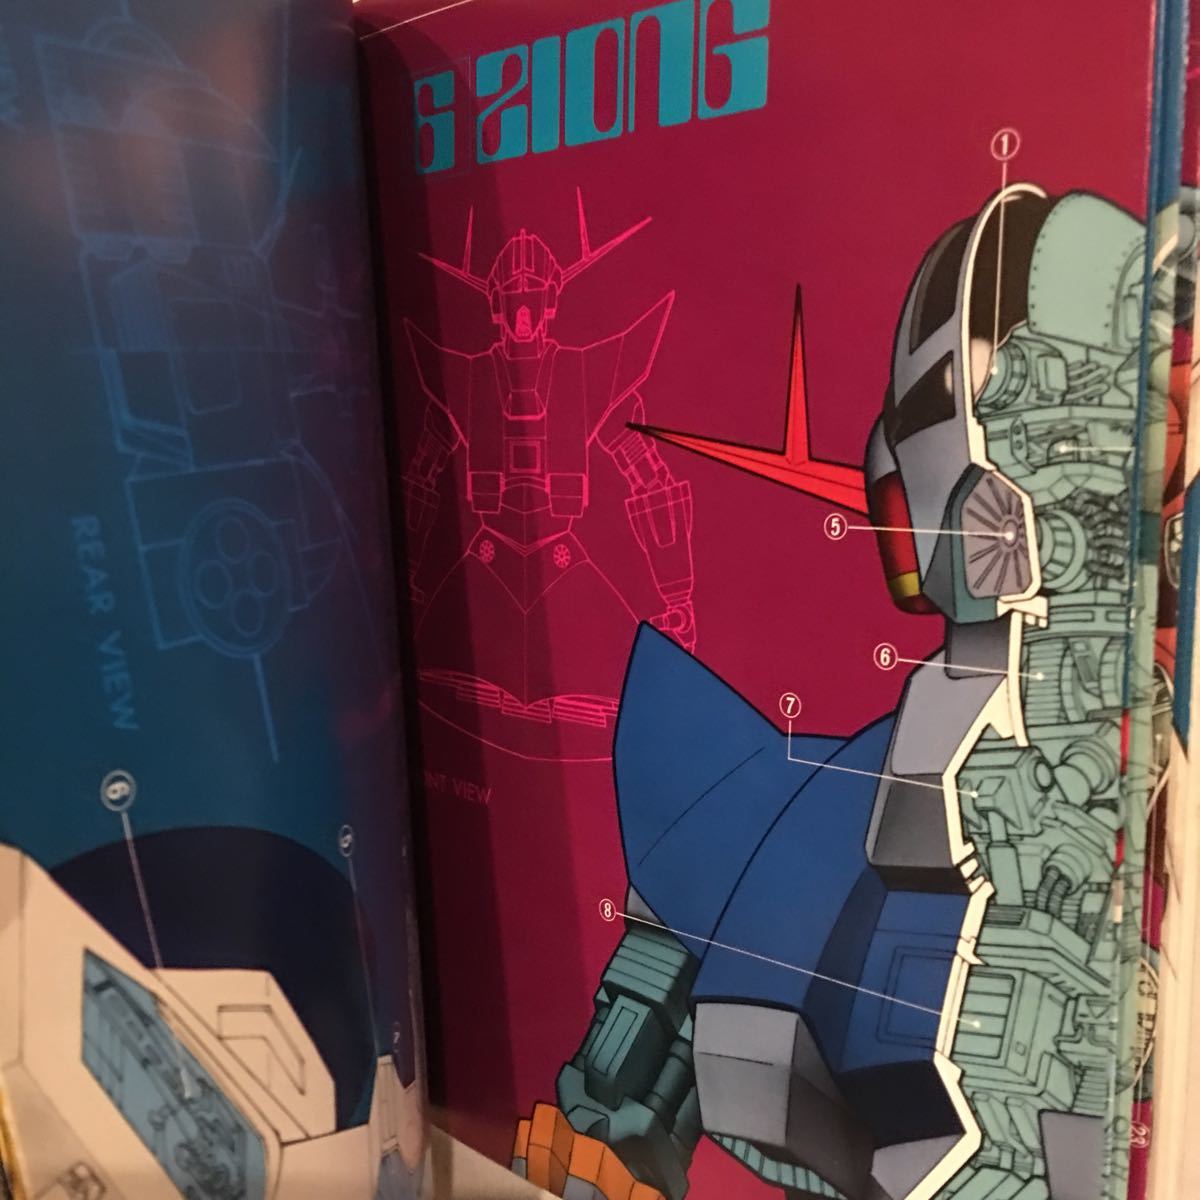  rare article that time thing Showa era 56 year Mobile Suit Gundam manual book@ instructions large river .. man illustration creation material collection car Ame crab k The kdomTHE ORIGIN